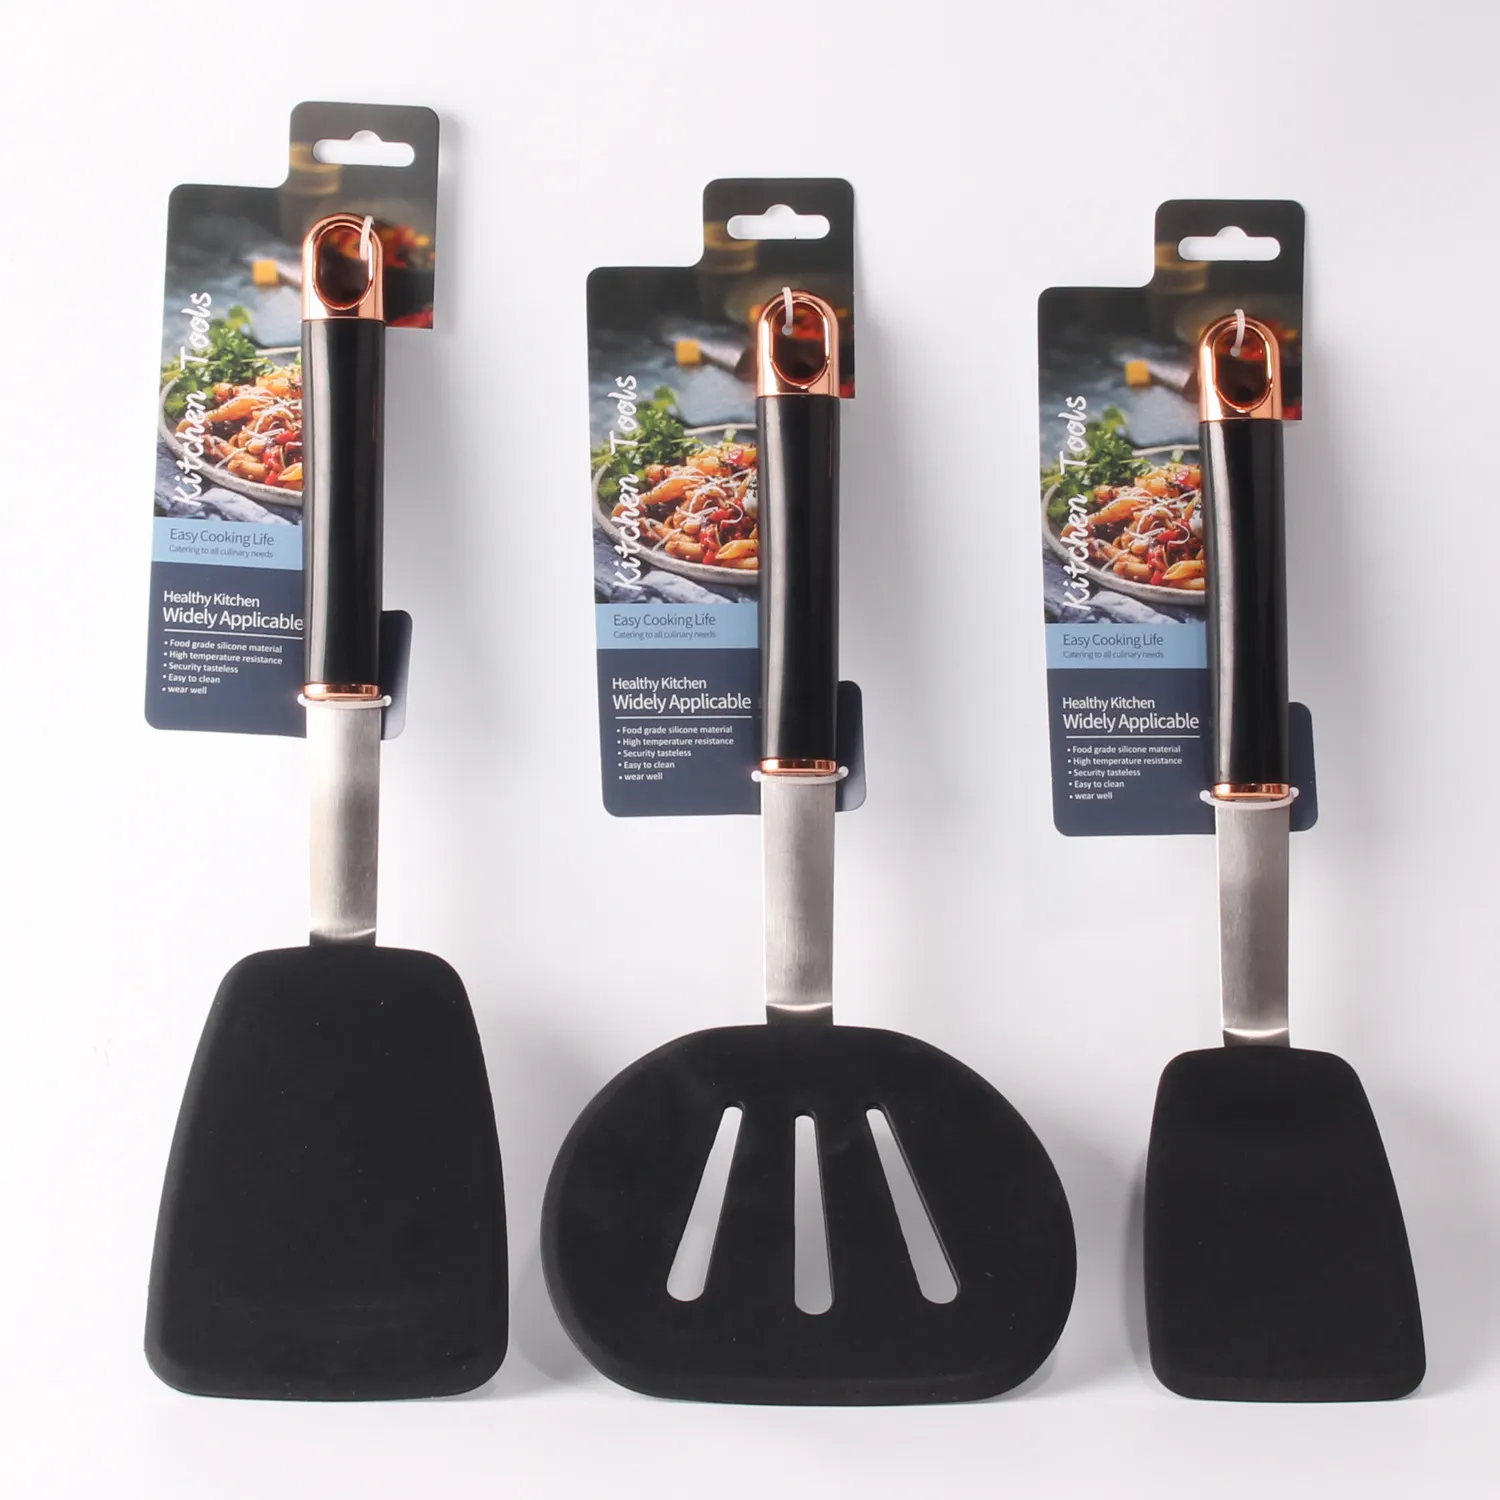 Flexible Silicone Spatula Heat Resistant Up To 600f Rubber Spatula - Bpa Free Spatula Silicone For Cooking